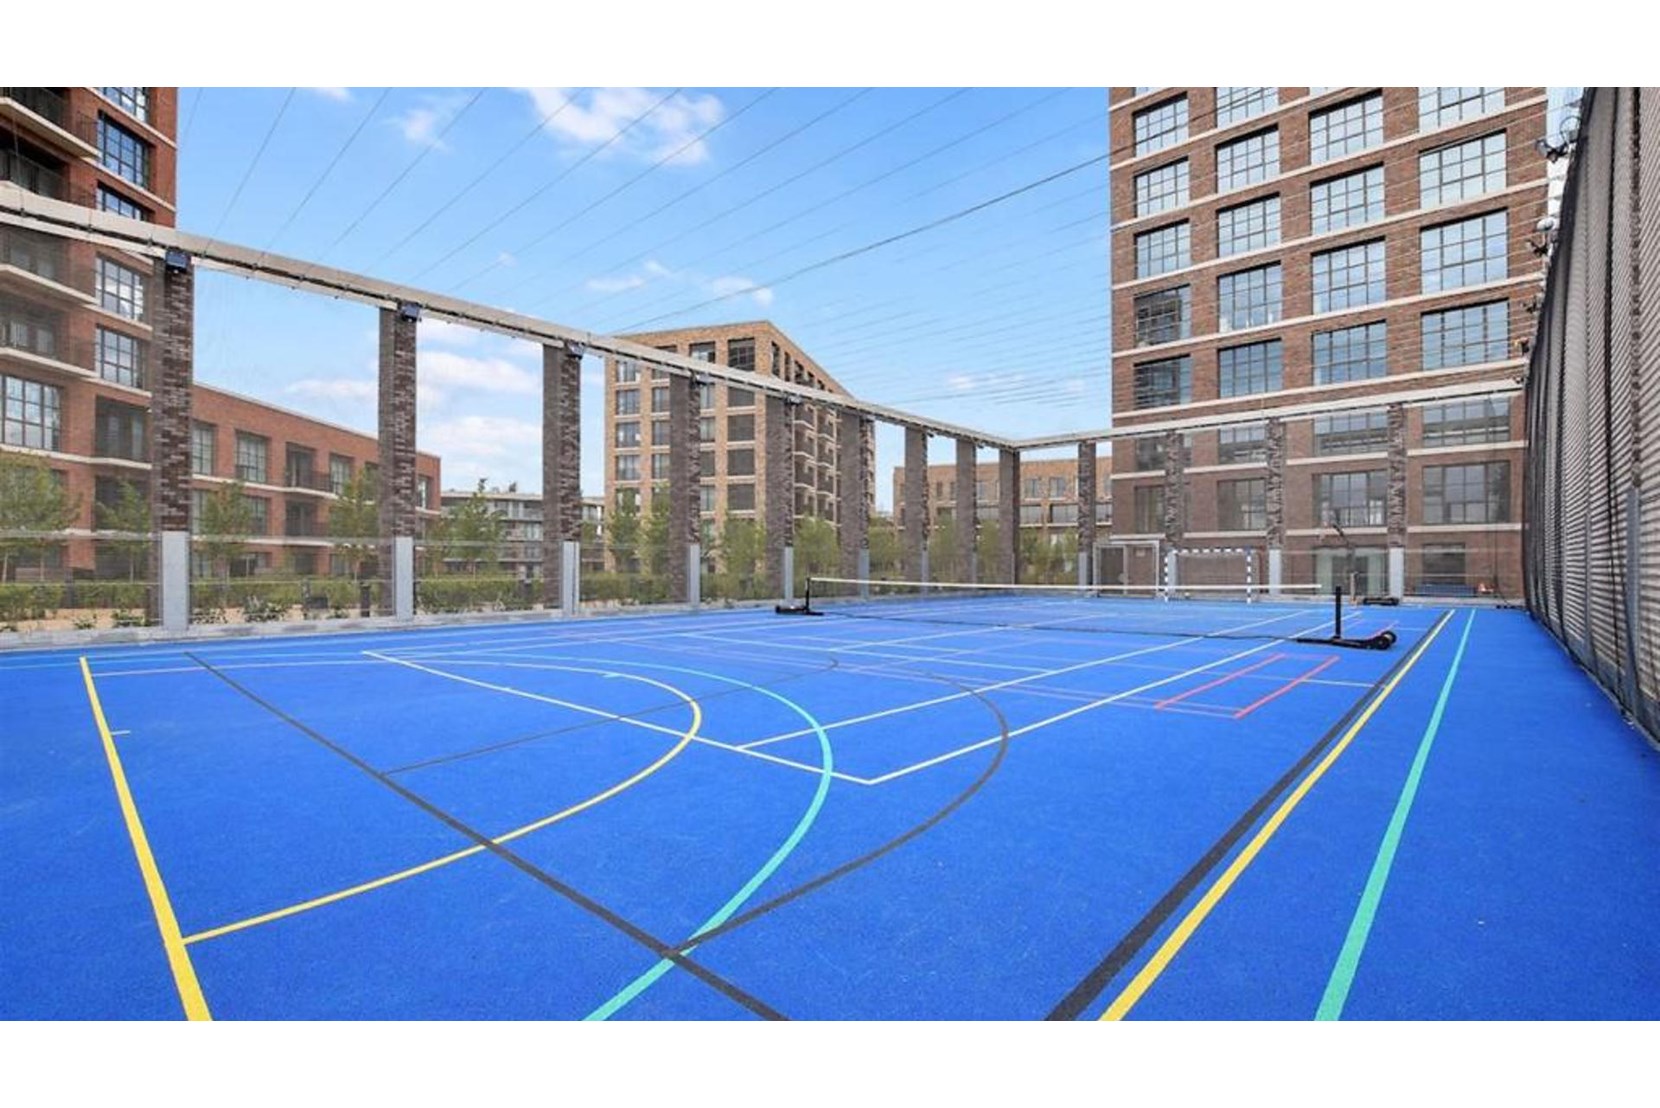 Apartments to Rent by Folio at Porter's Edge, Southwark, SE16, communal sports area